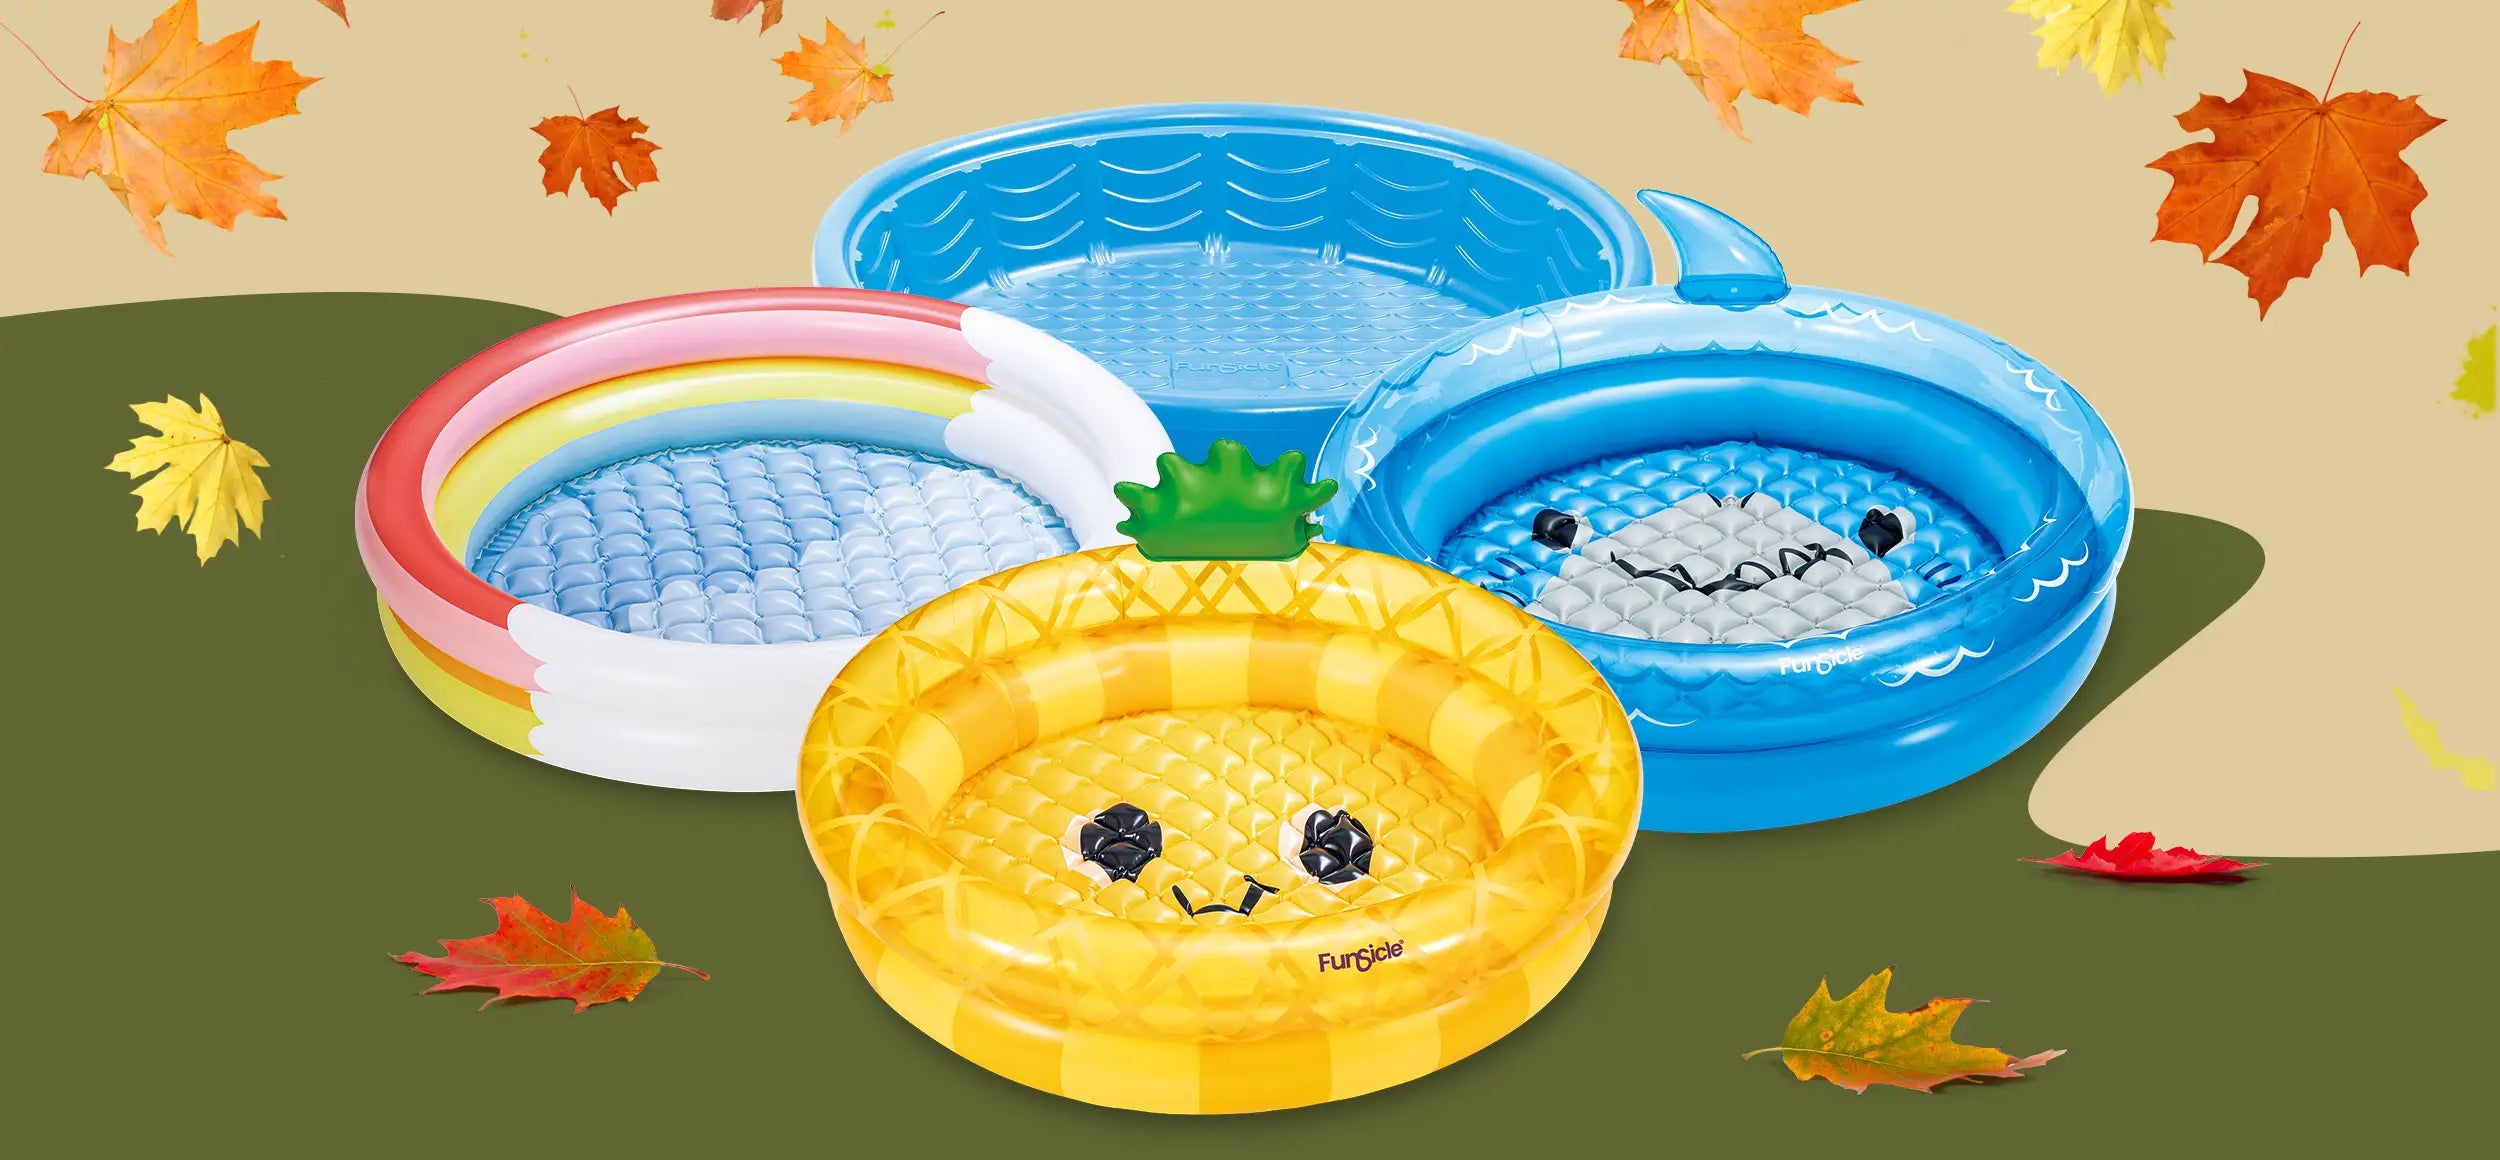 4 Crafty Ideas for Kiddie Pool Adventures This Fall